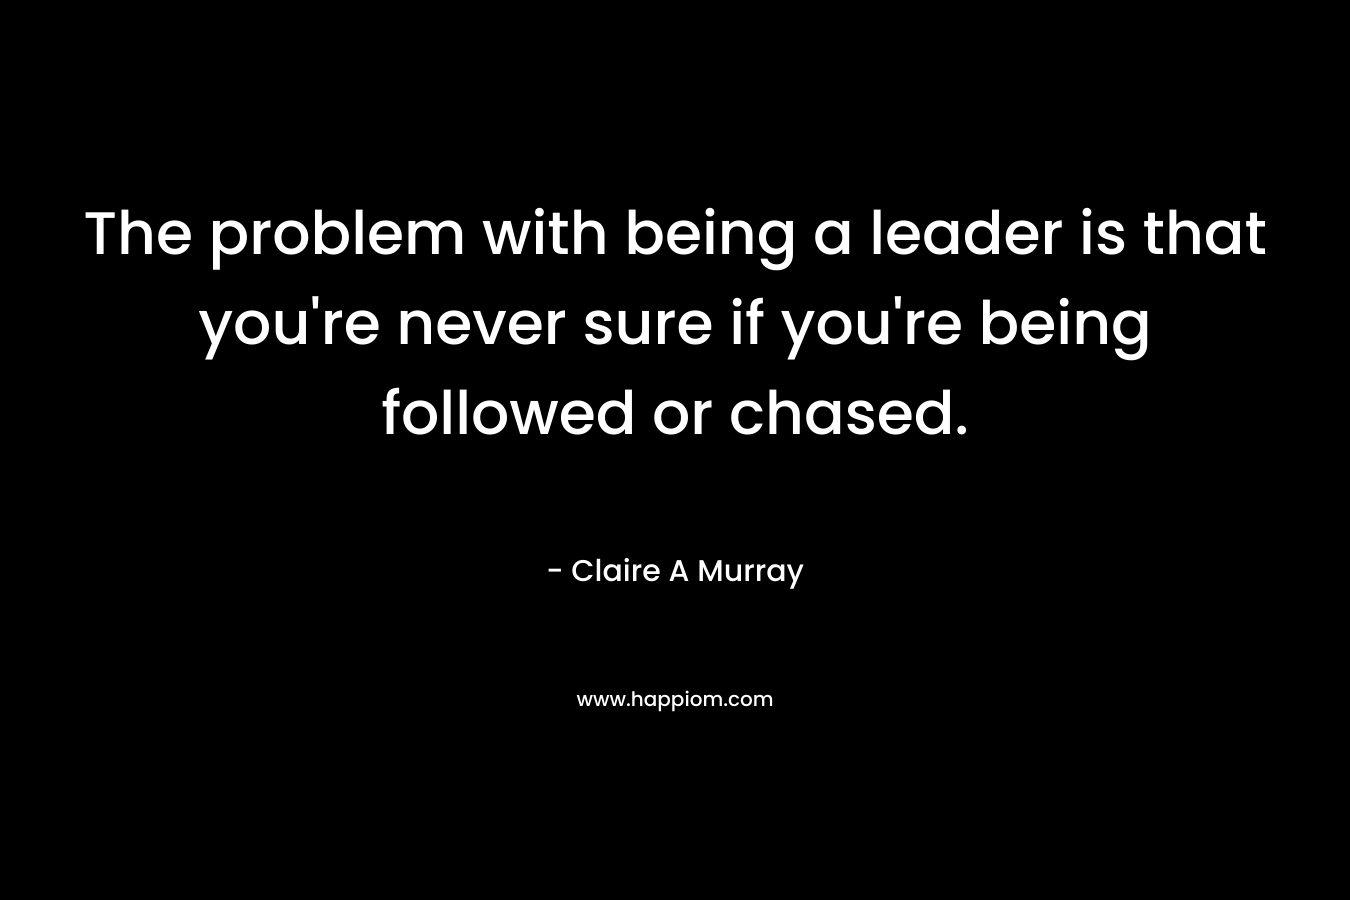 The problem with being a leader is that you’re never sure if you’re being followed or chased. – Claire A Murray